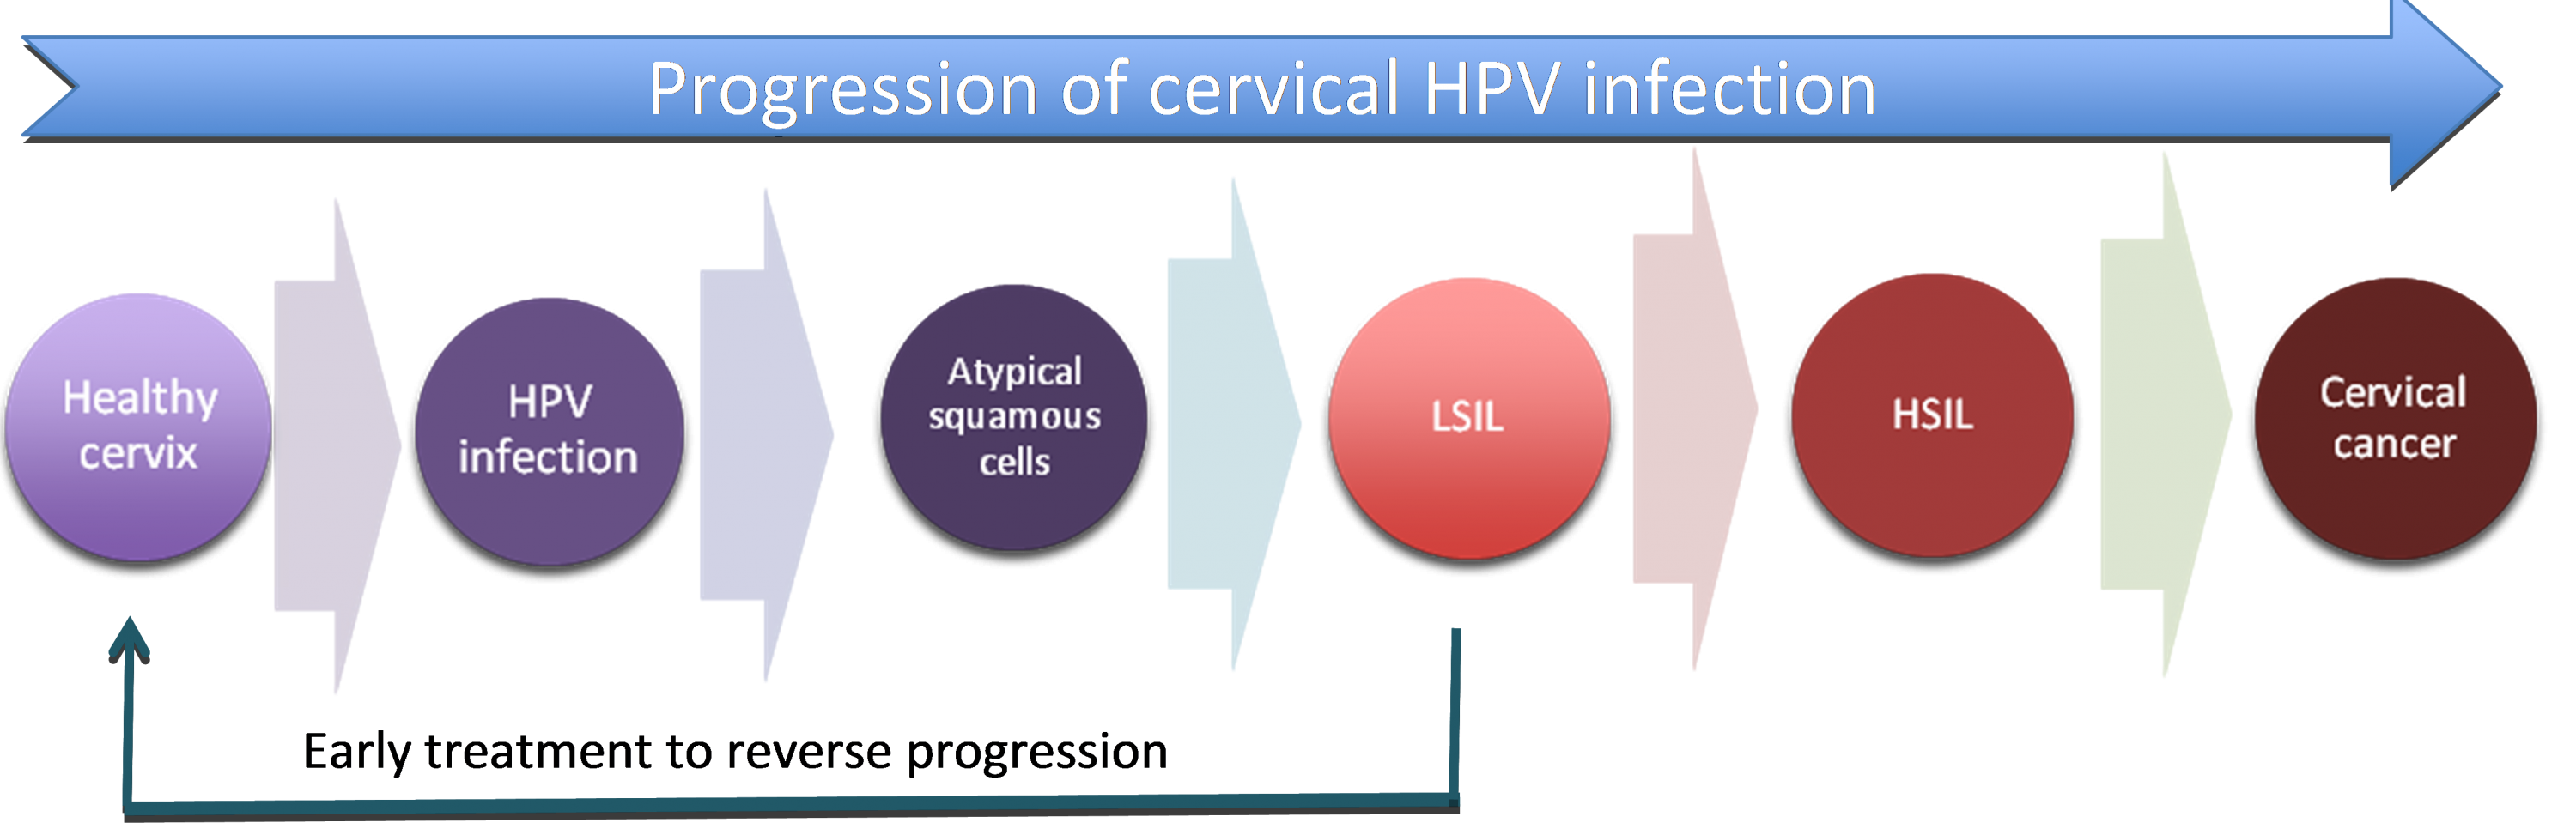 Flow chart showing the progression of cervical HPV infection.